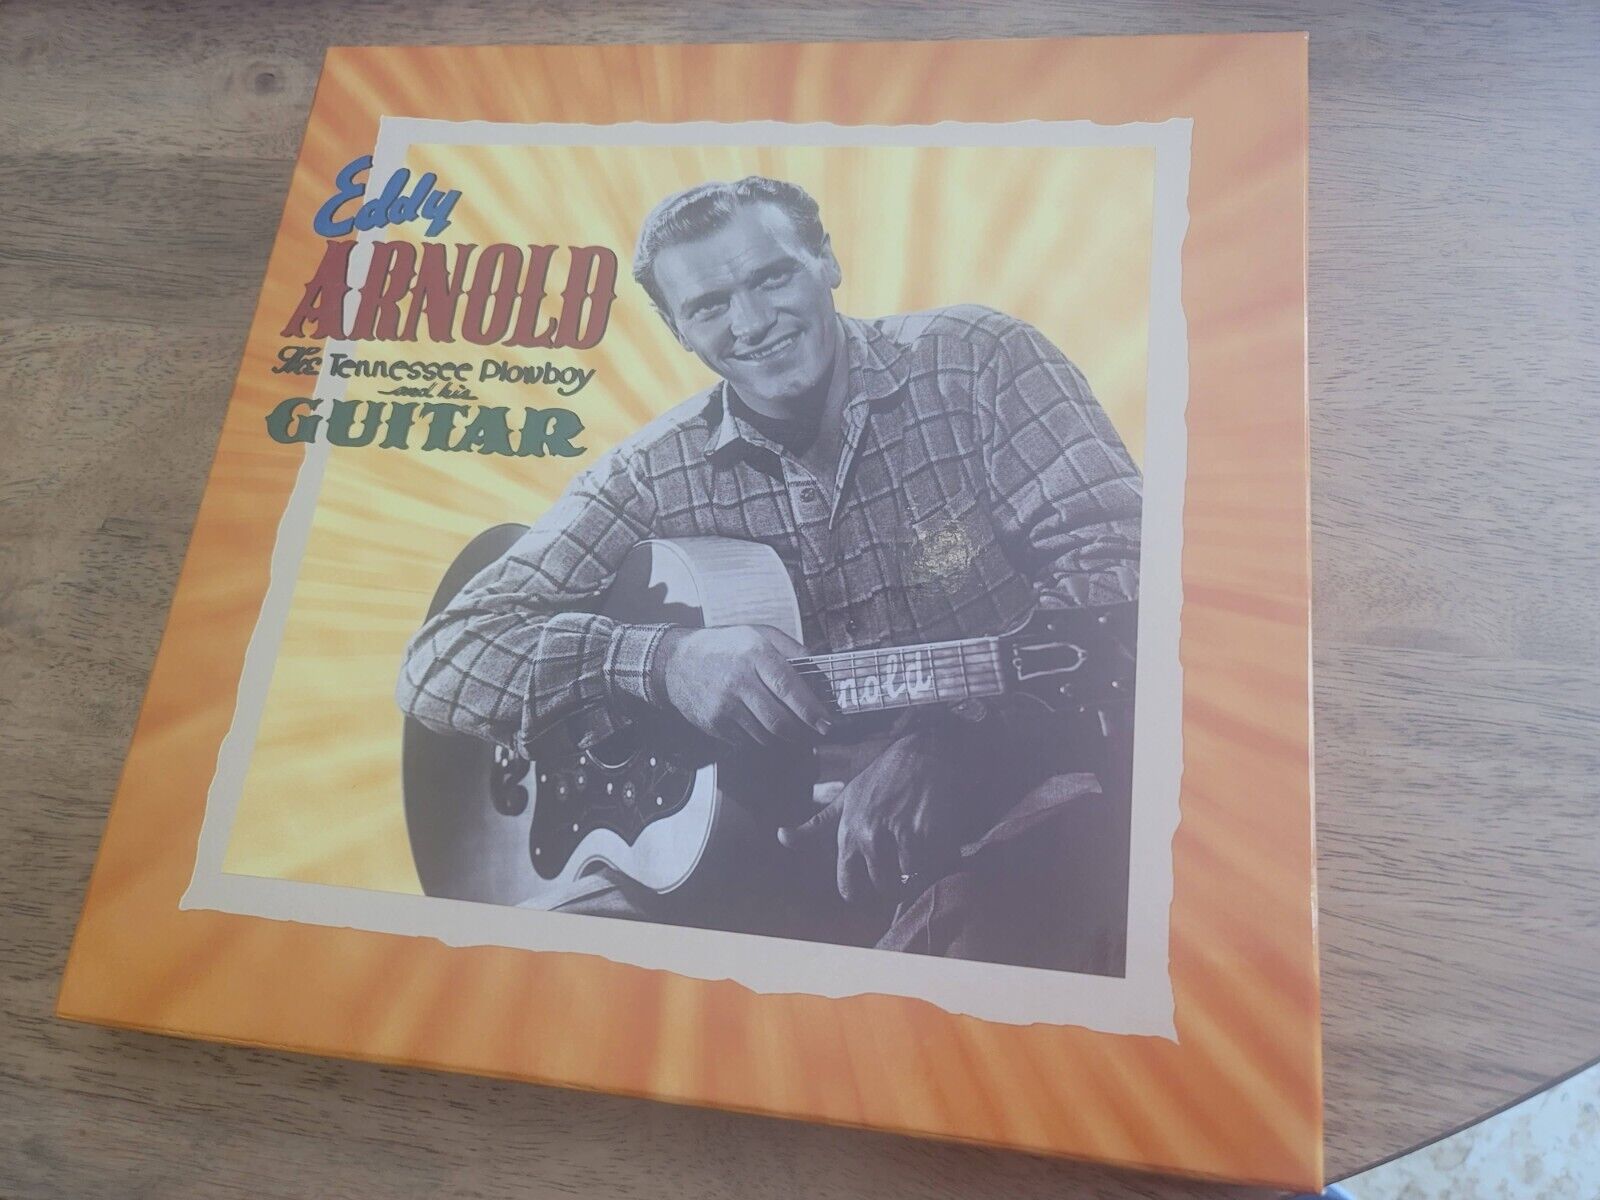 Tennessee Plowboy & His Guitar by Eddy Arnold (CD, 1998)